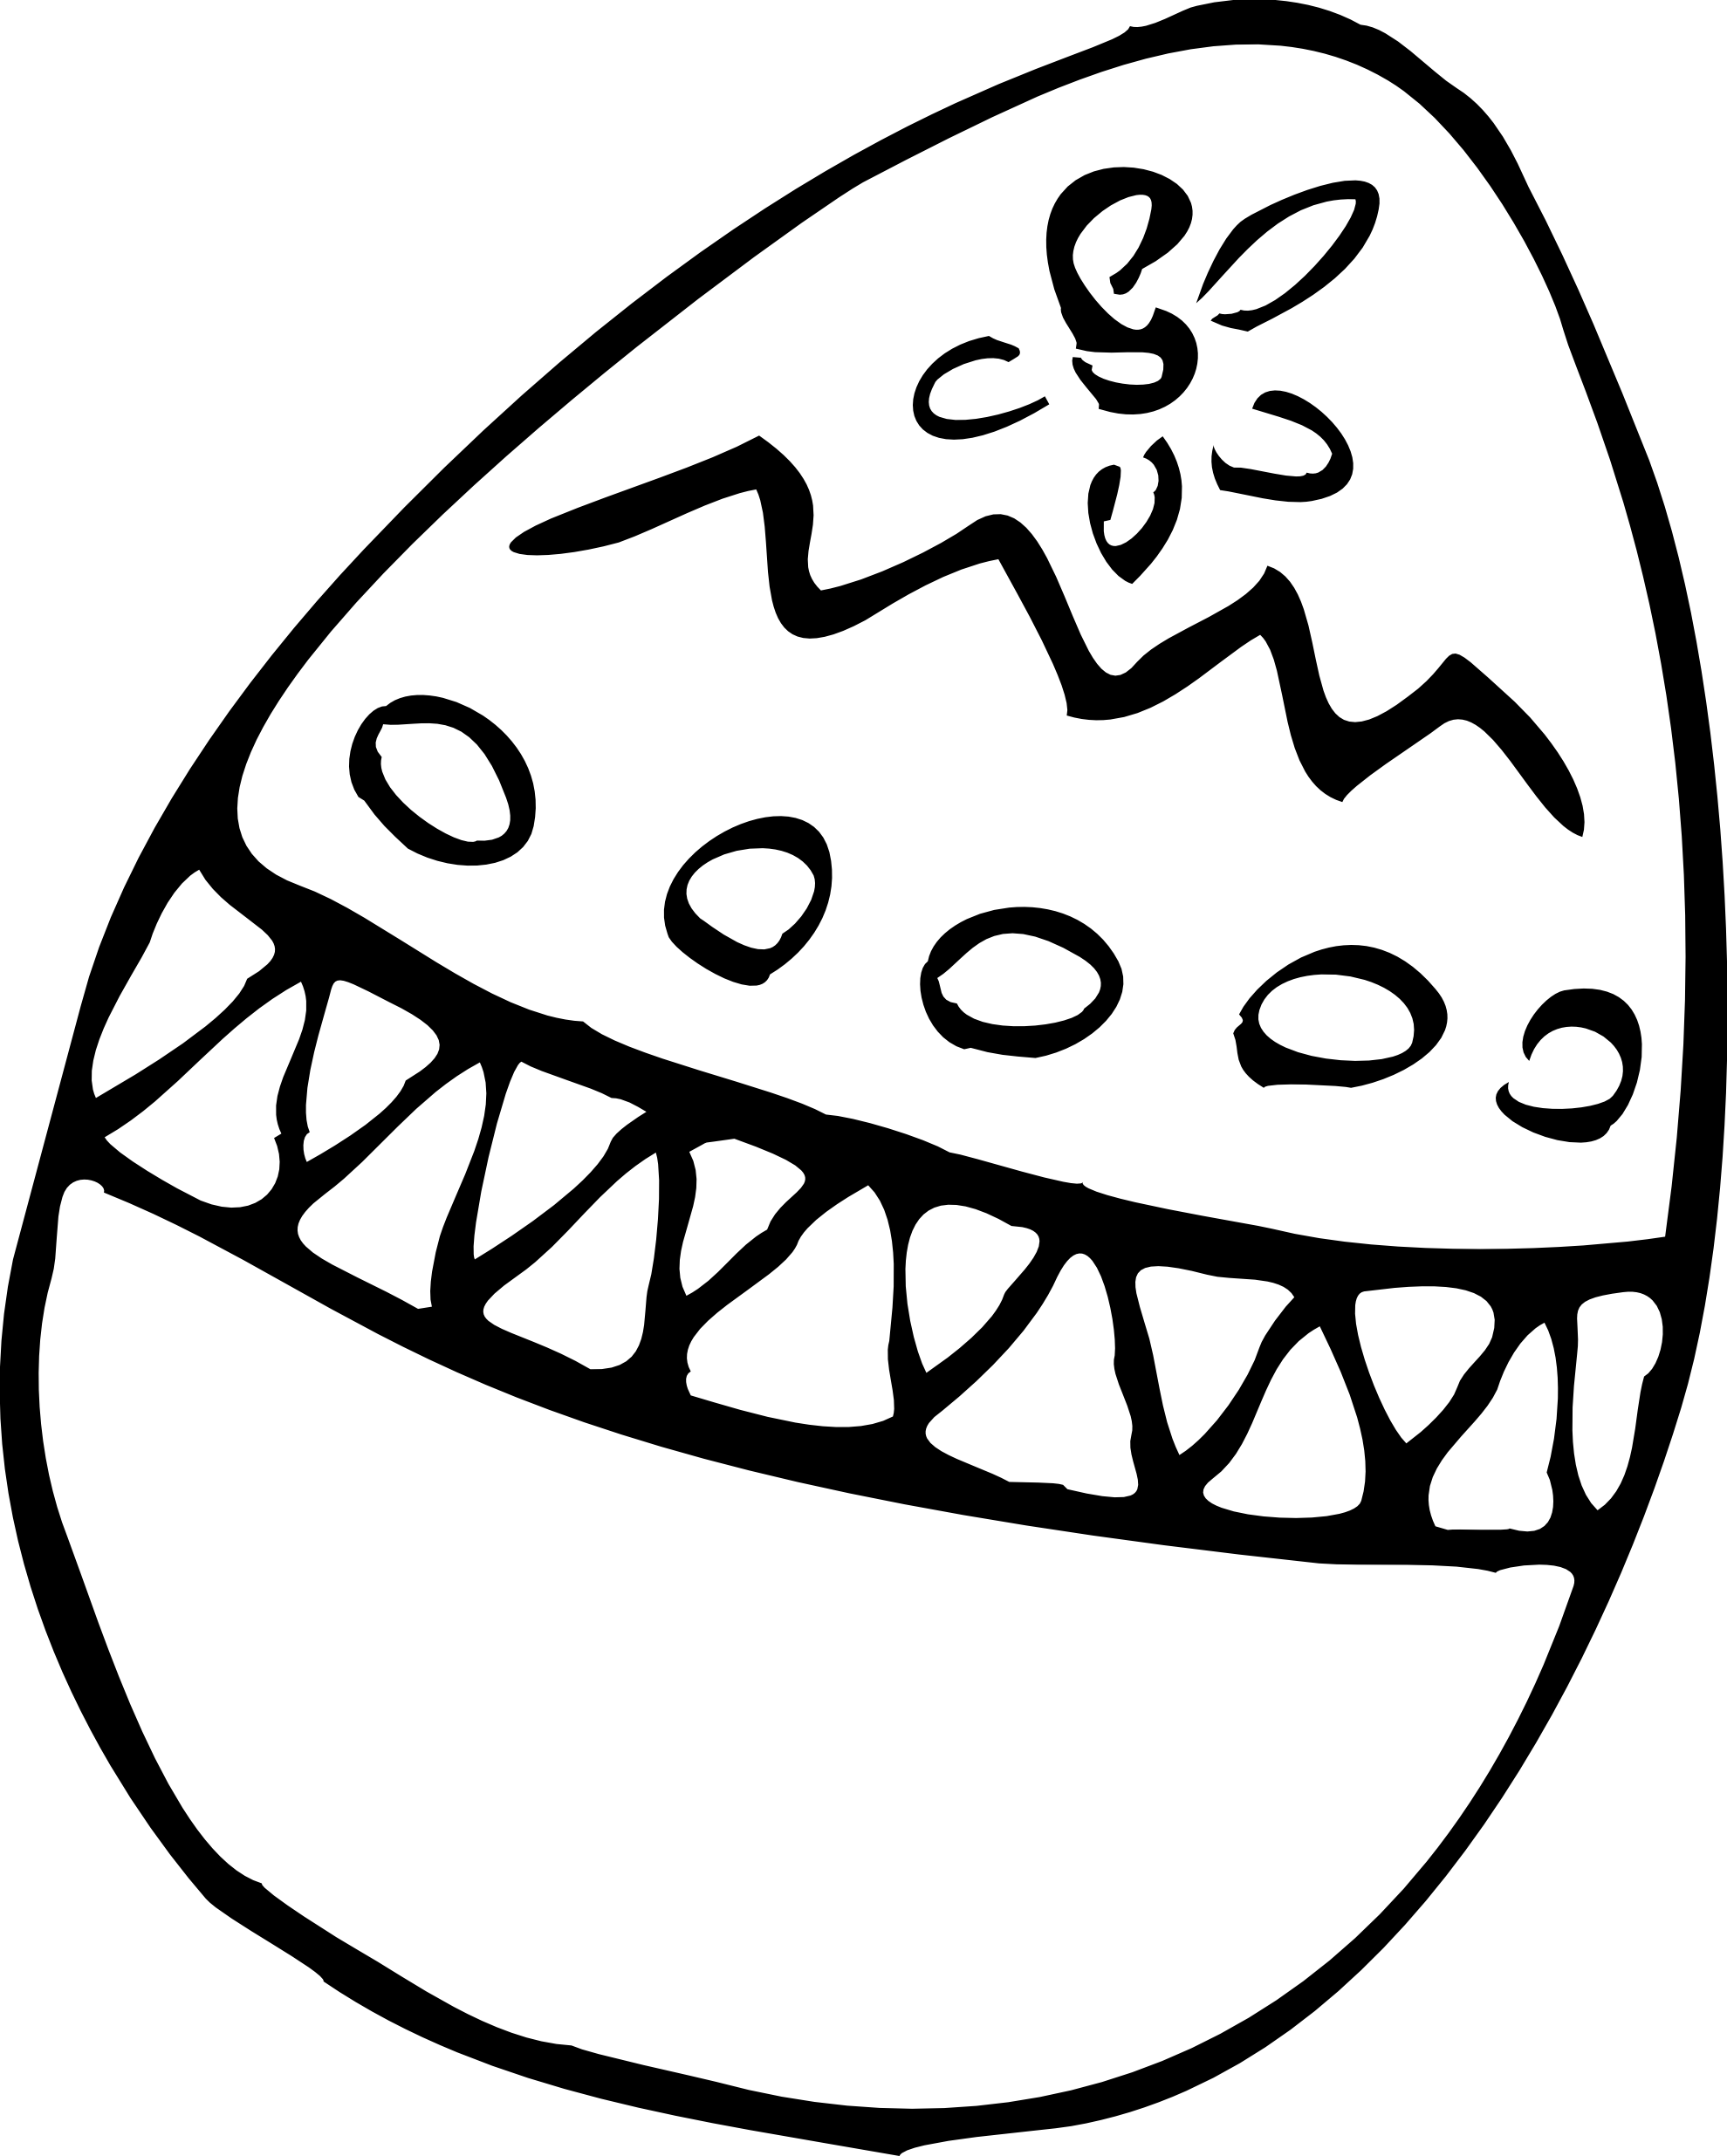 free easter egg clipart black and white - photo #6